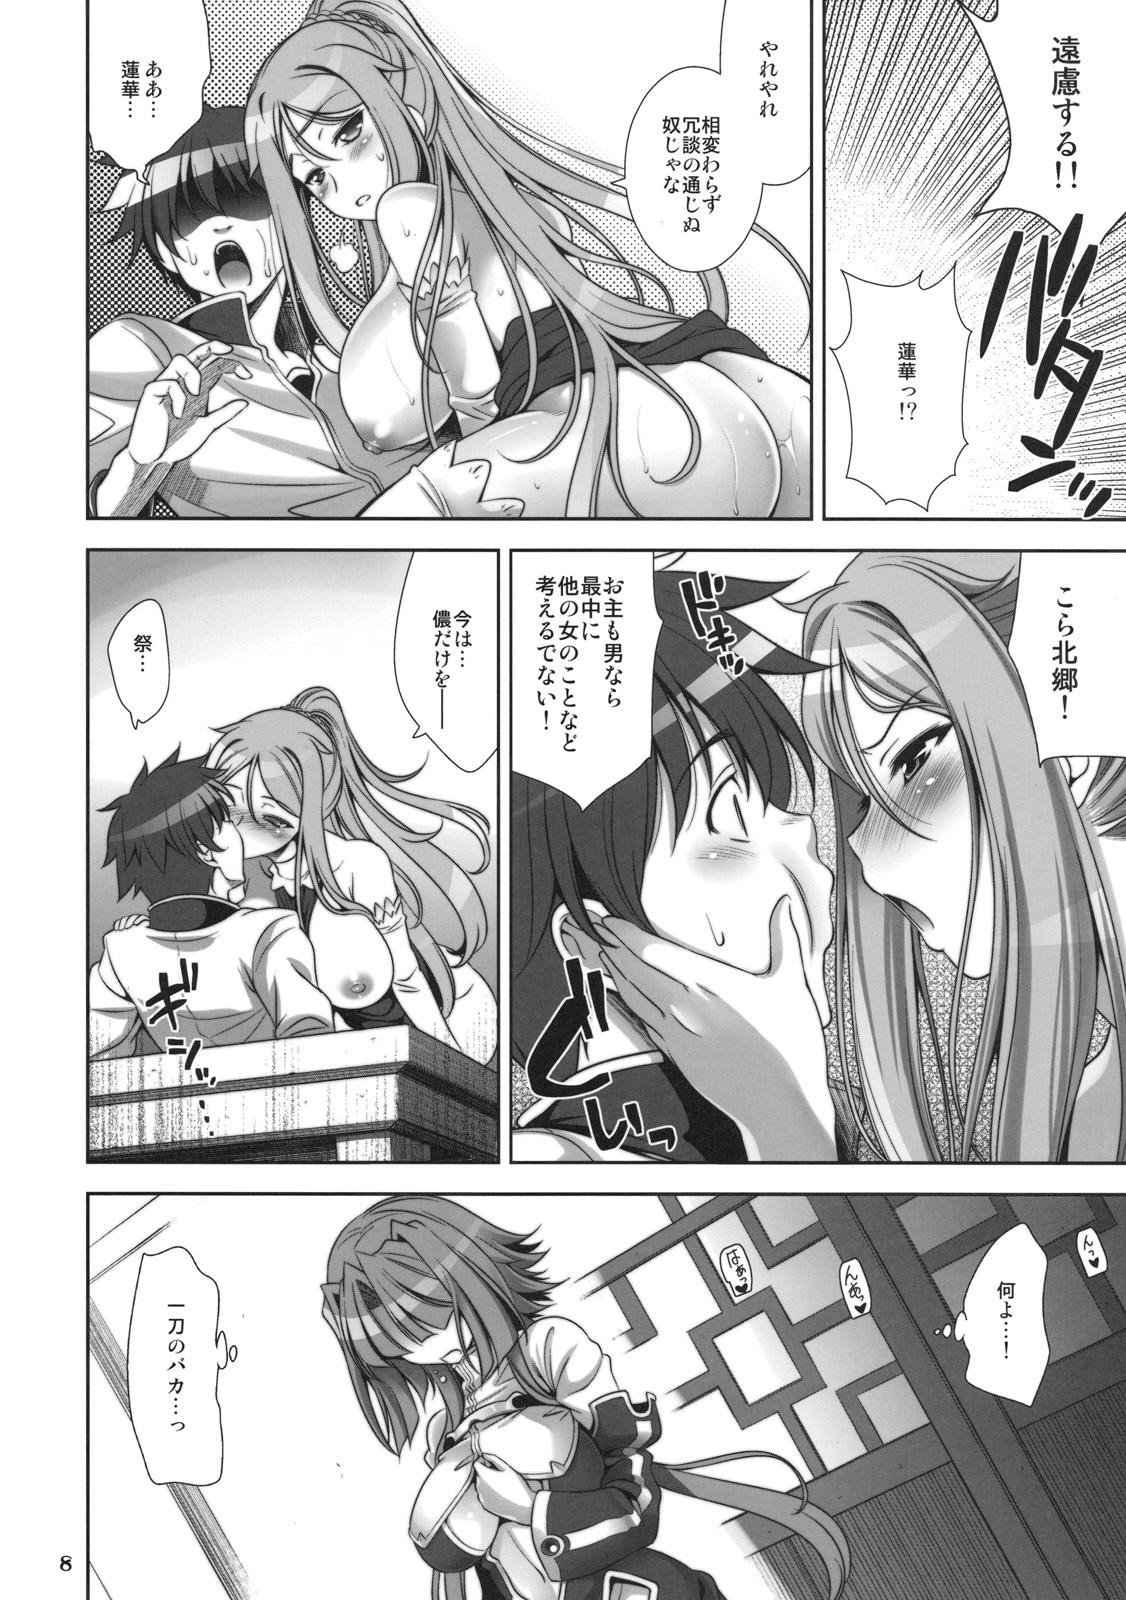 Flash Go! My Way - Koihime musou Exposed - Page 7